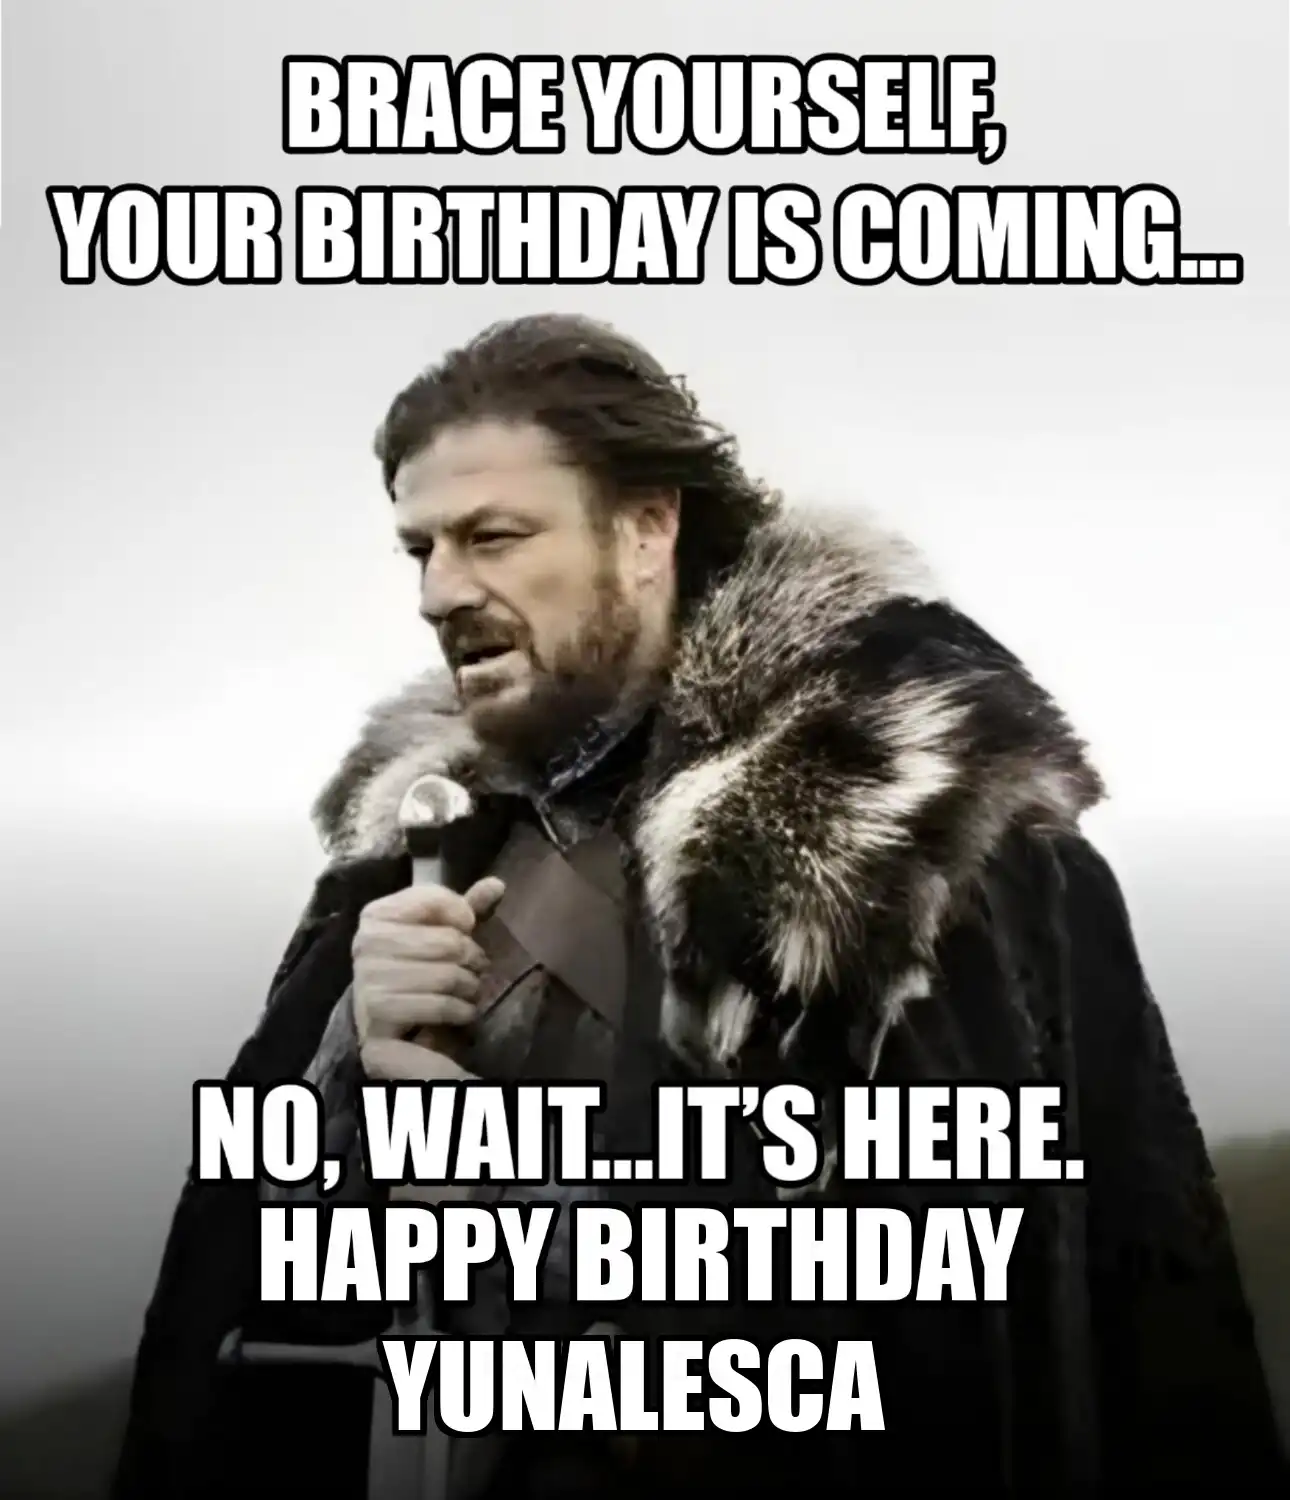 Happy Birthday Yunalesca Brace Yourself Your Birthday Is Coming Meme